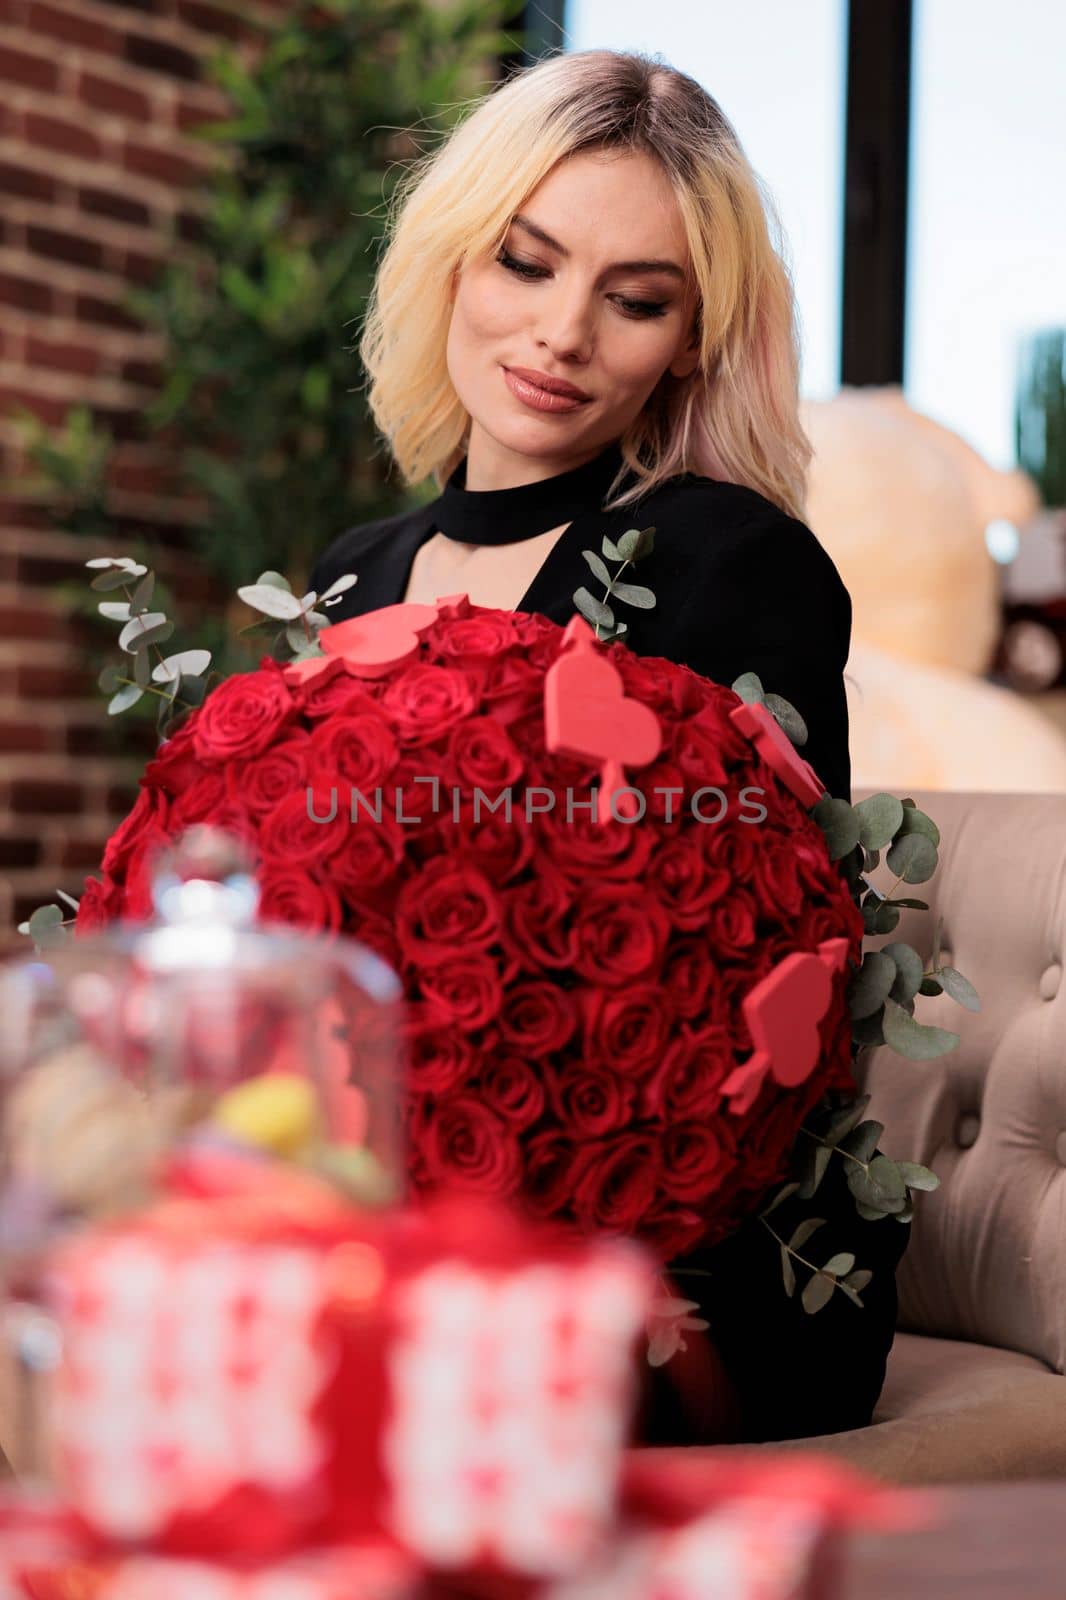 Smiling woman holding red roses bouquet, blurred giftboxes on table, valentines day luxury presents, romantic date. Excited blonde girlfriend sitting with flowers from boyfriend